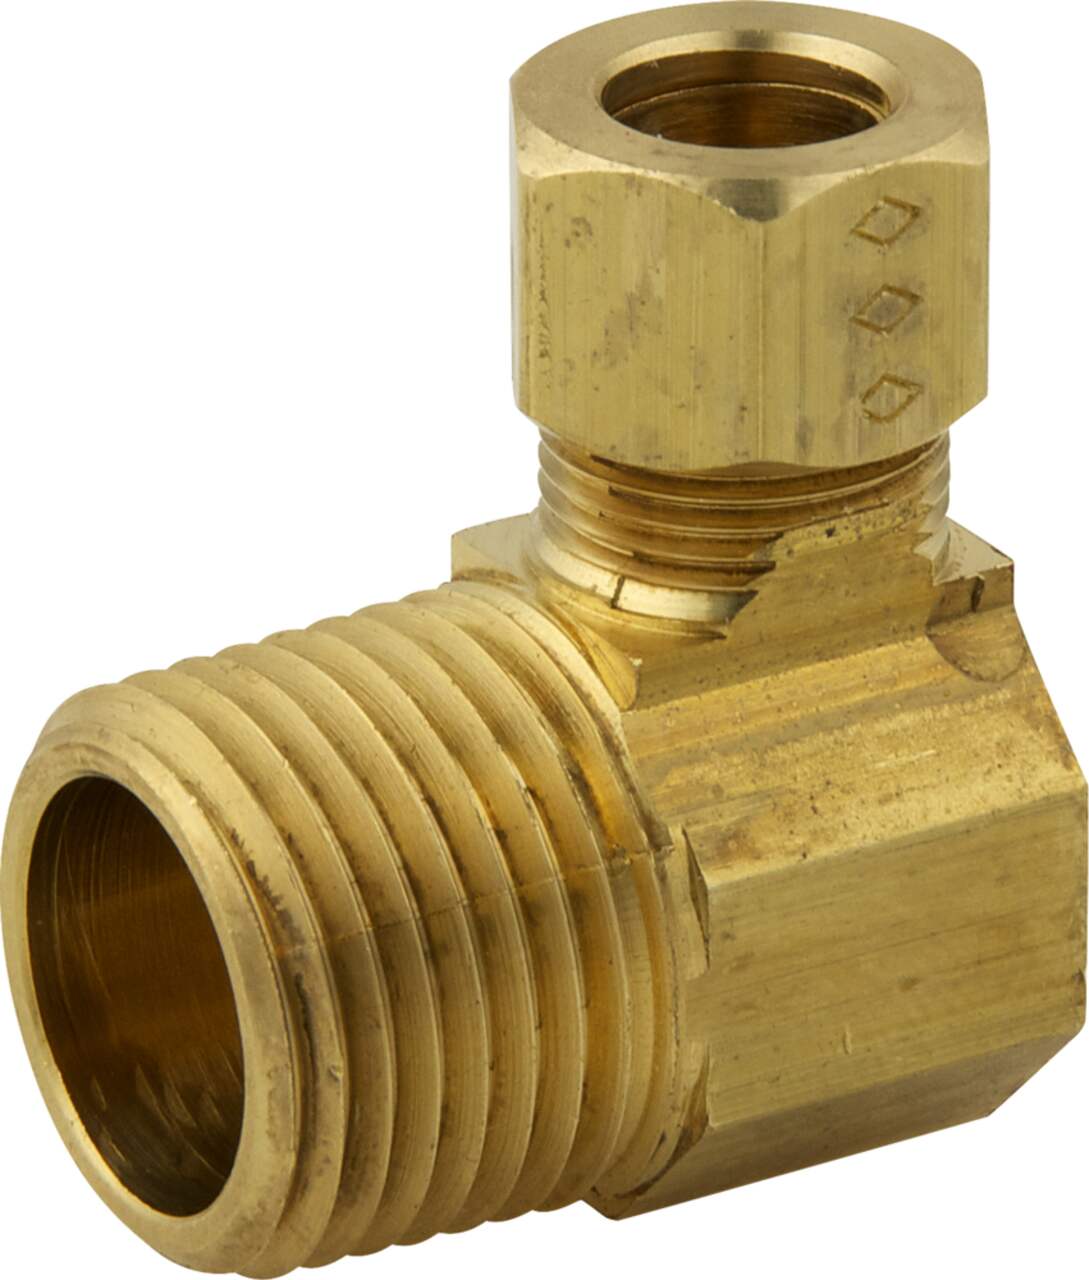 PlumbShop Brass Compression Elbow Fitting, 1/2-in MIP x 3/8-in OD